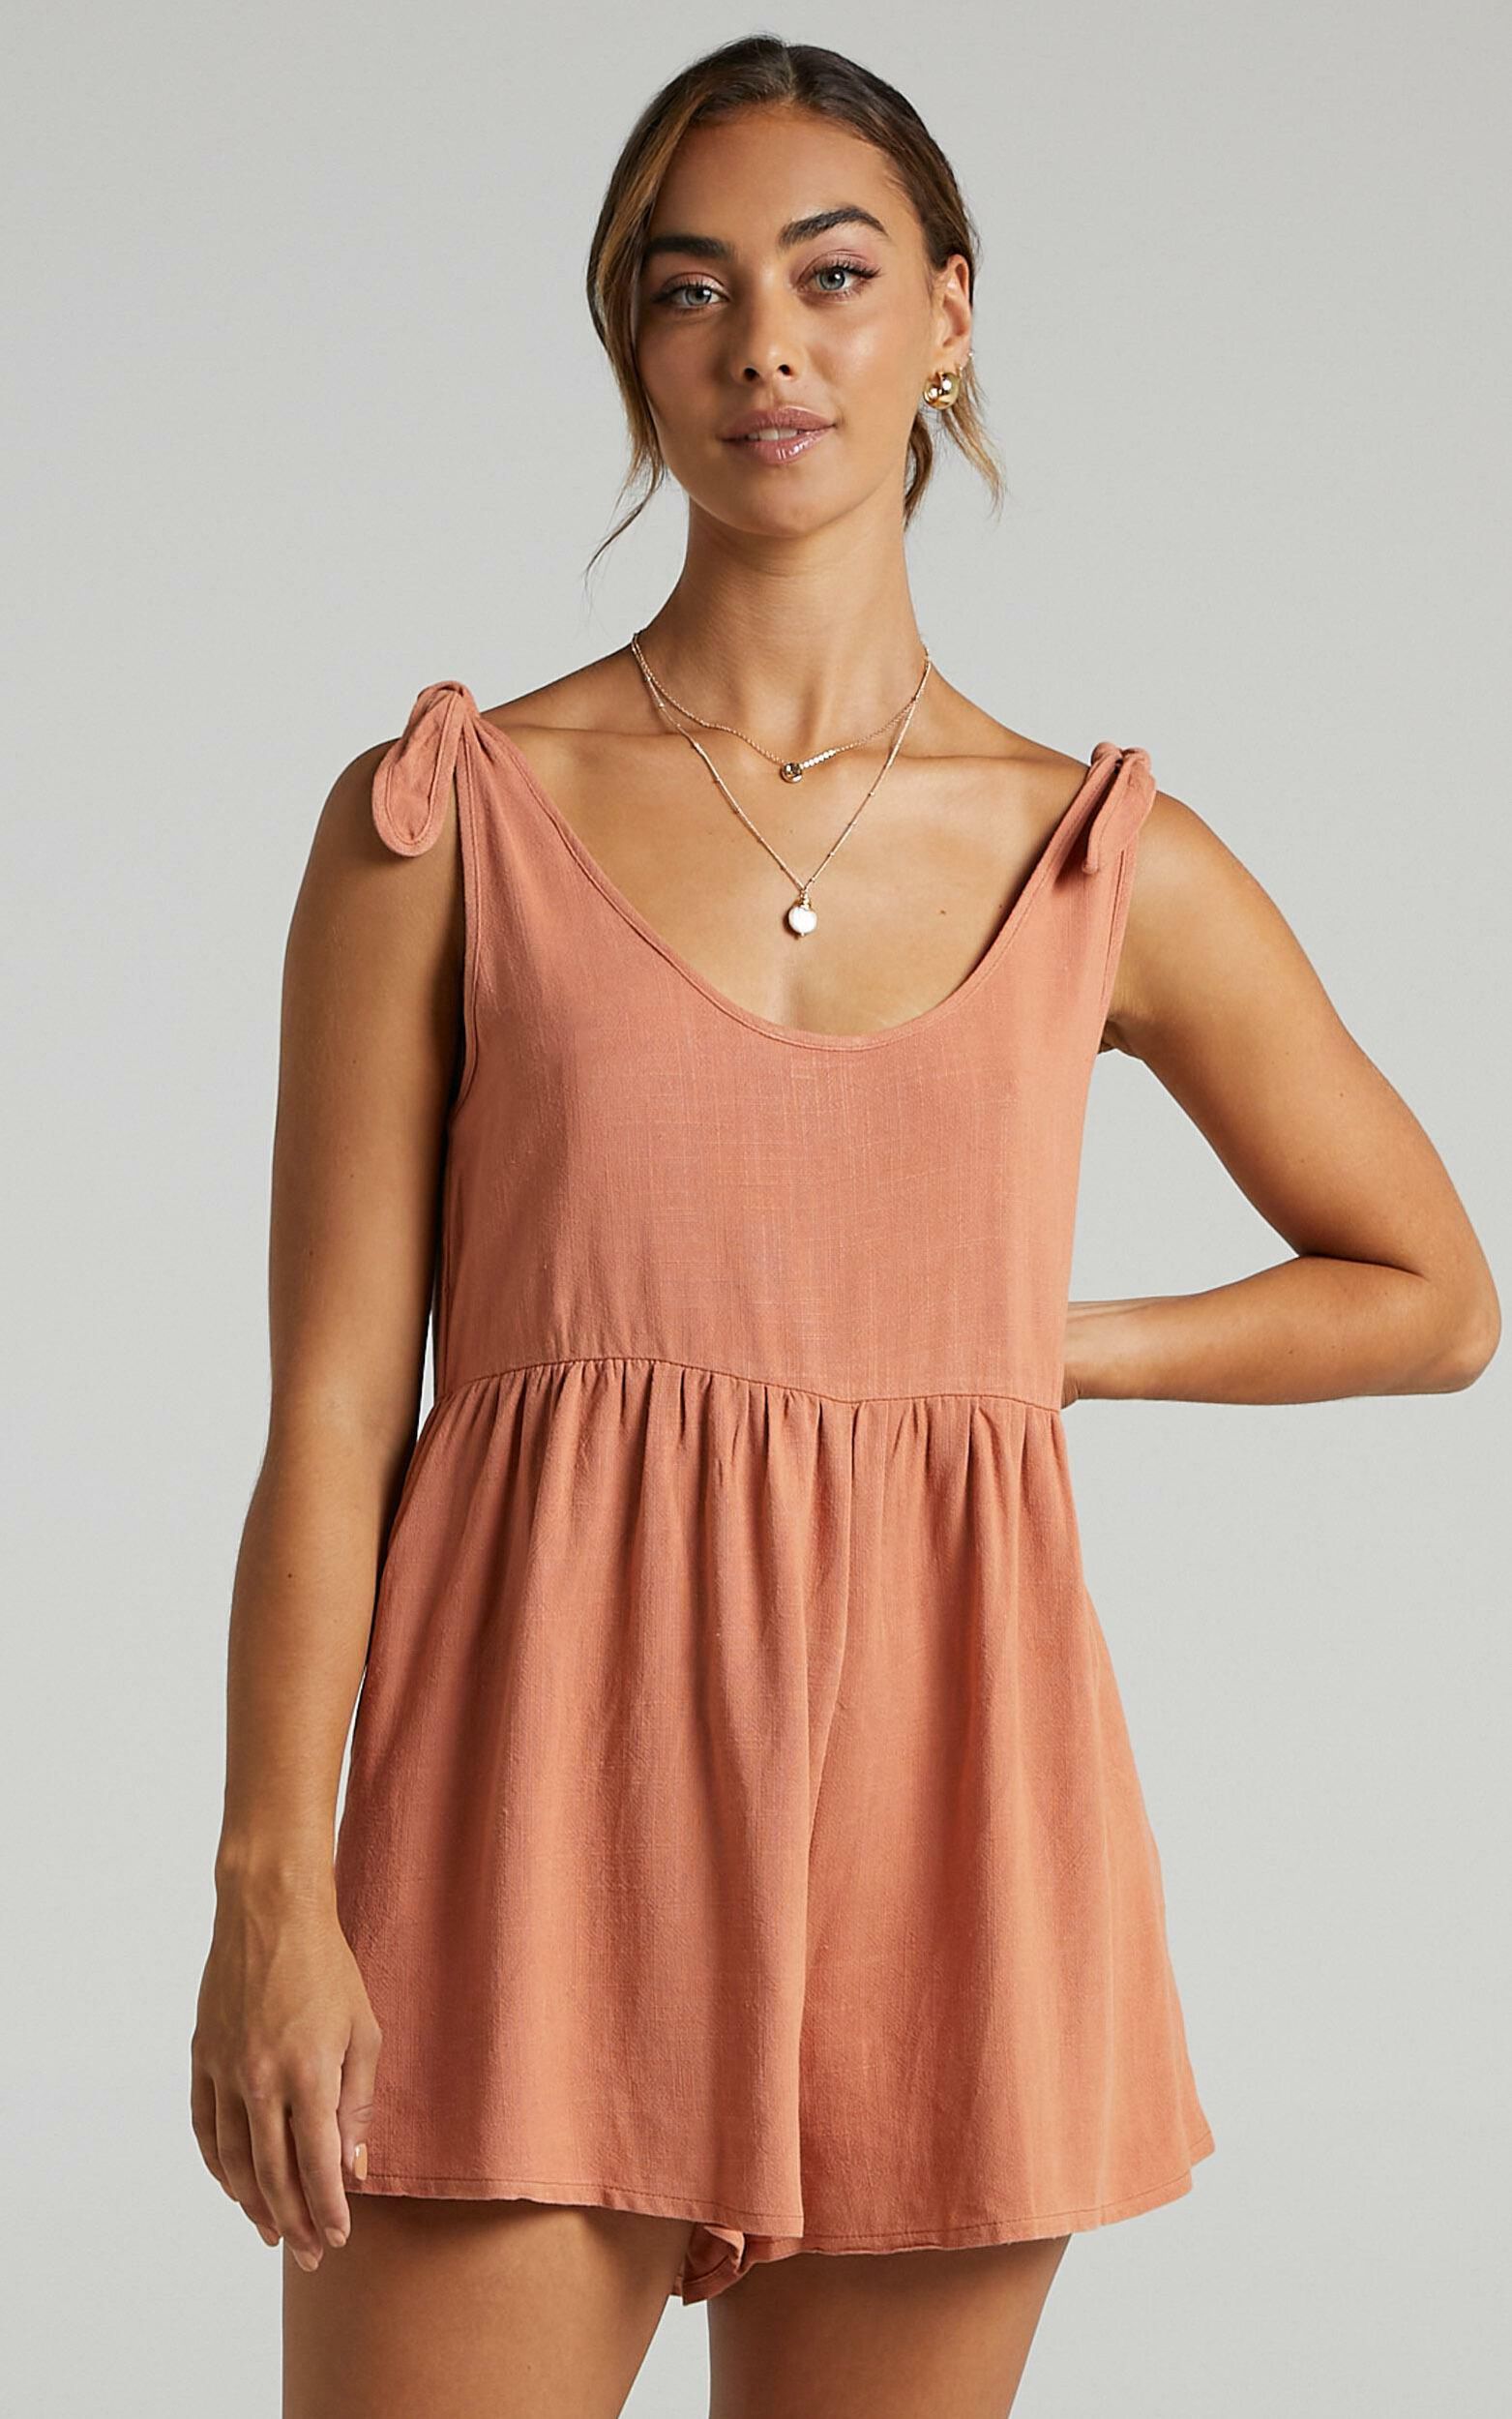 Bring This Down Playsuit In Dusty Rose Showpo Usa 5175